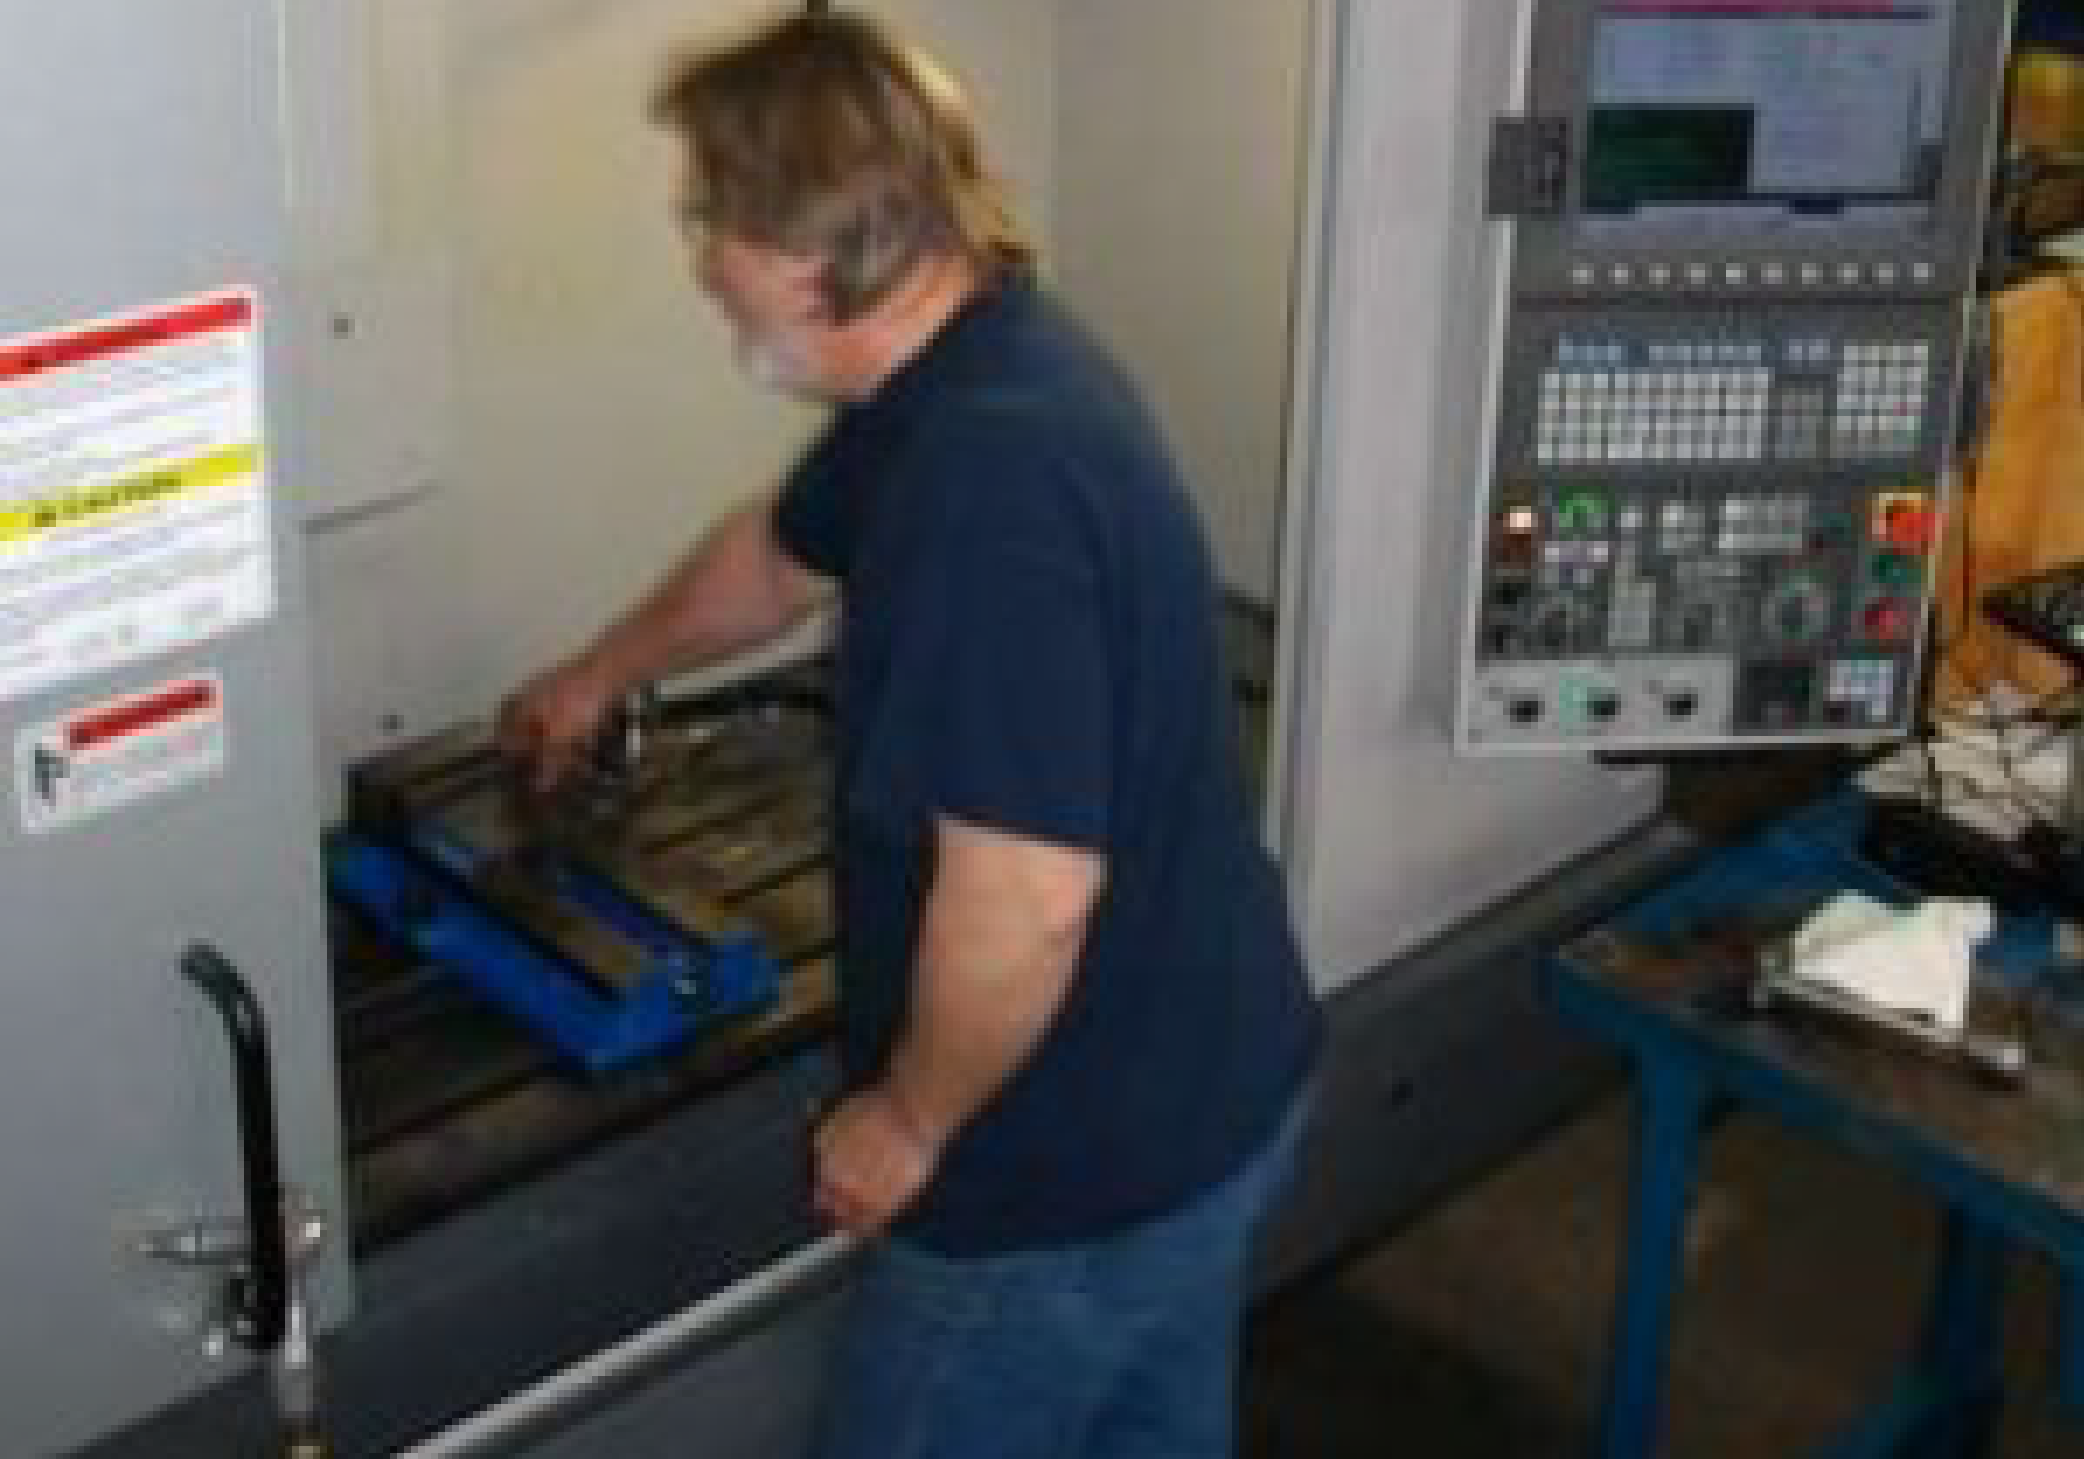 A man is removing a part from a CNC machine